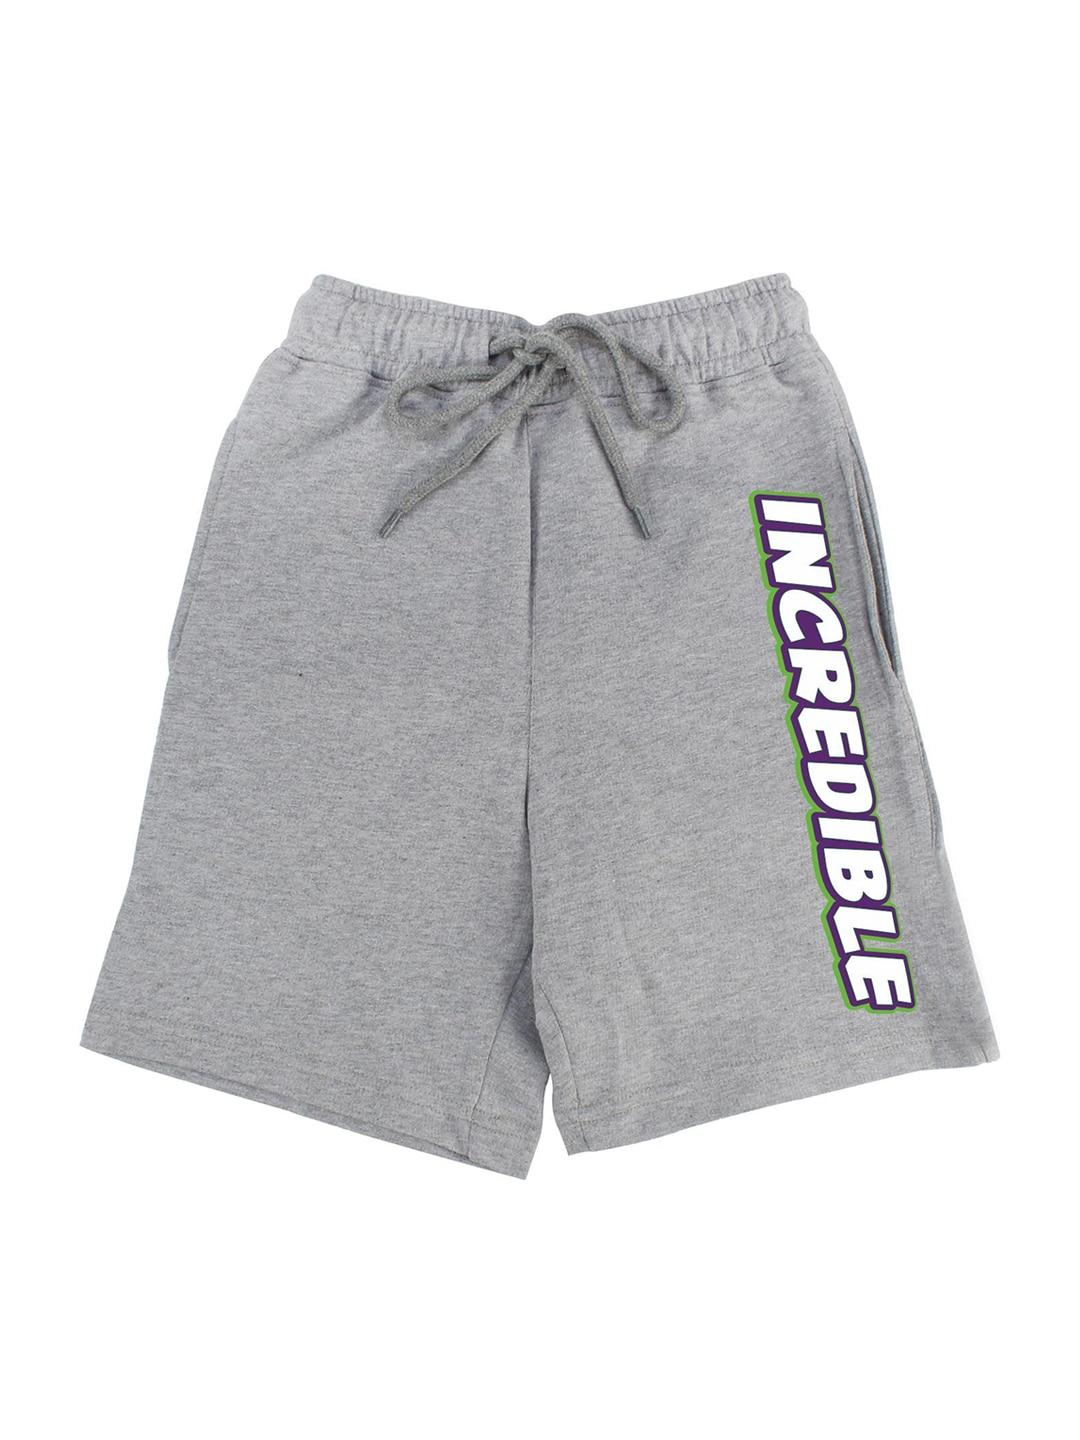 marvel by wear your mind boys grey avengers shorts